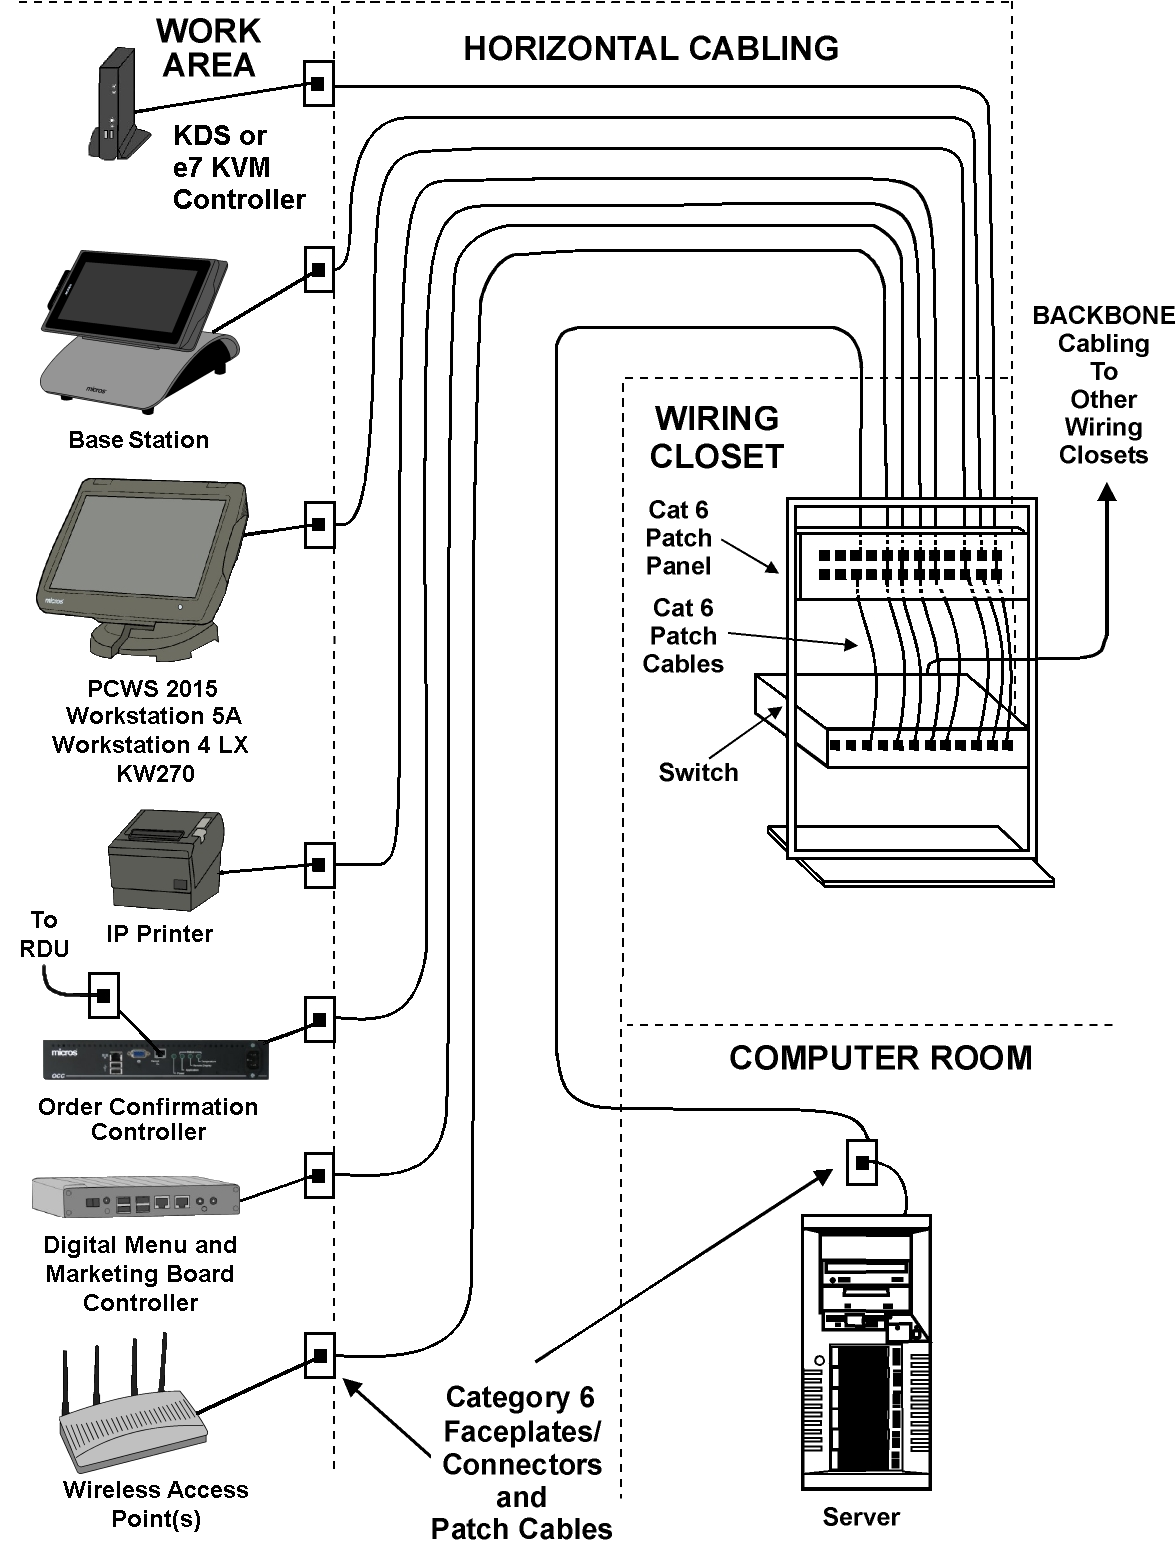 Patch Cable Cat 6 Wiring Diagram